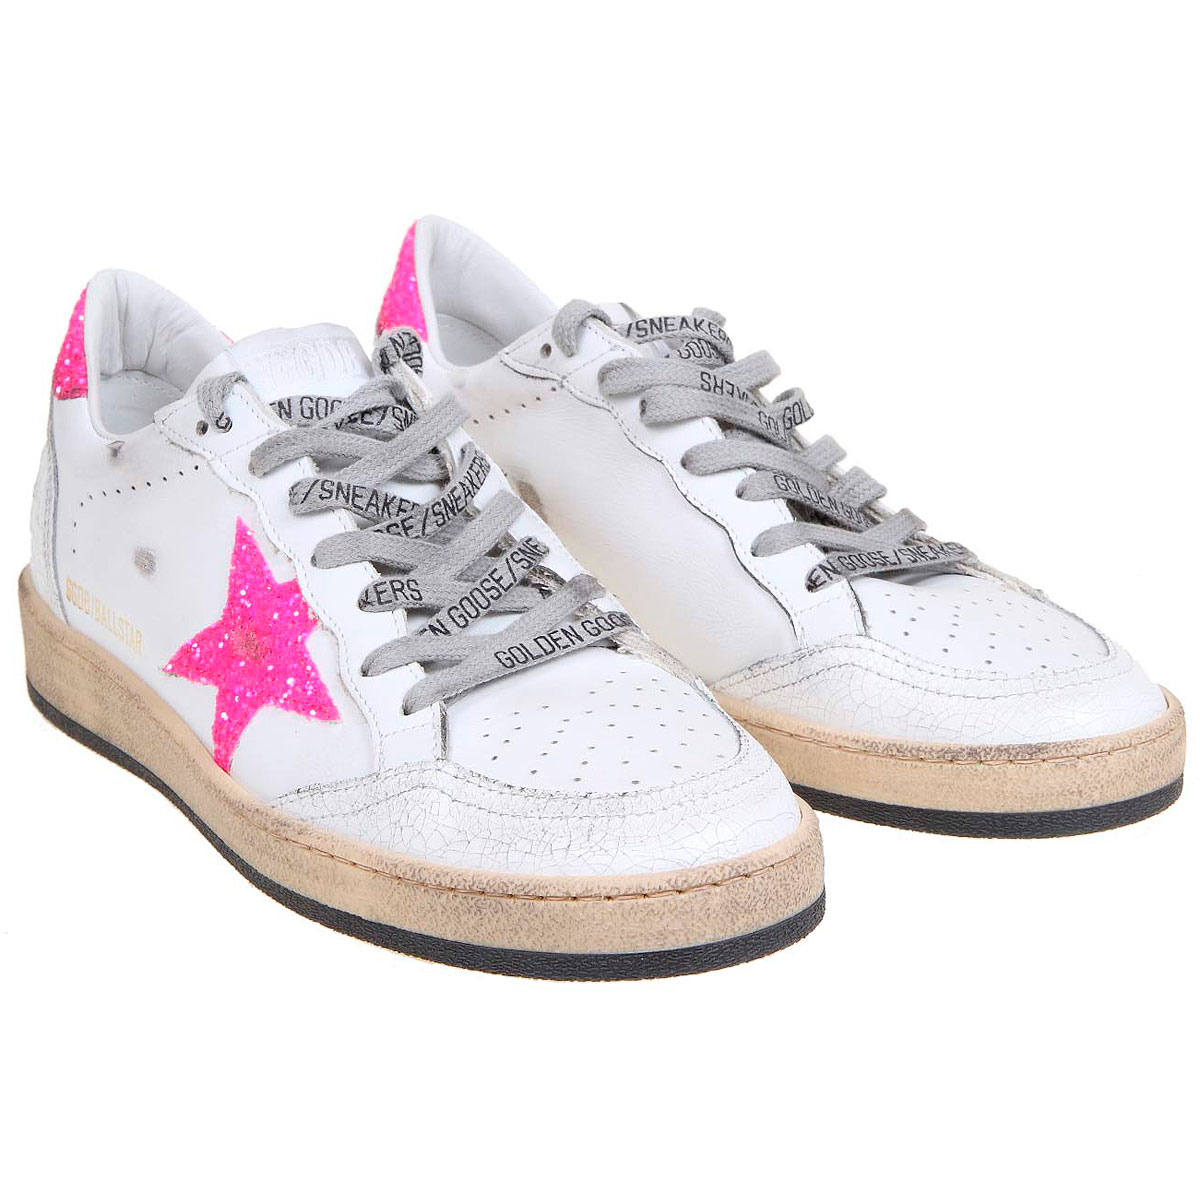 Womens Shoes Golden Goose, Style code: gwf00117-f001034-10475